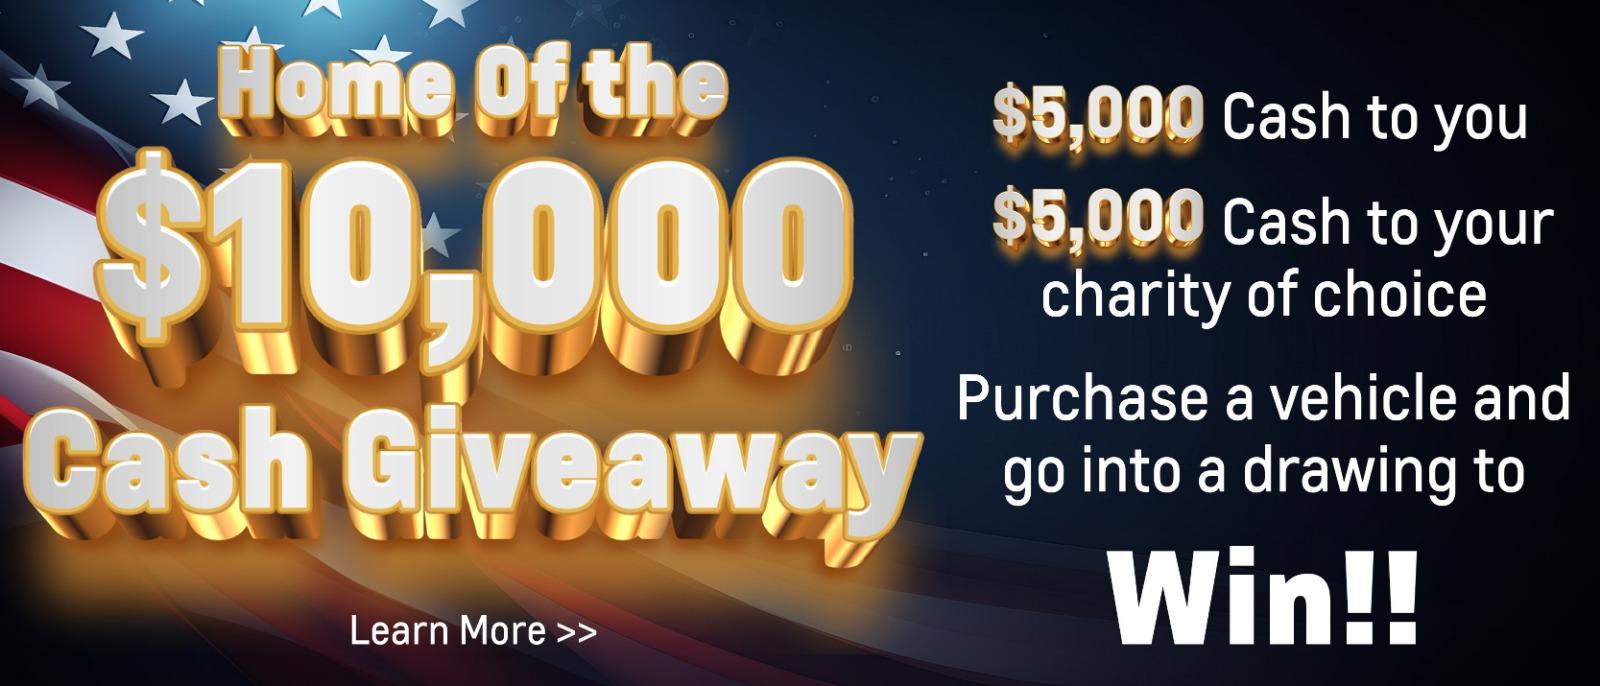 Home of the $10,000 Cash Giveaway